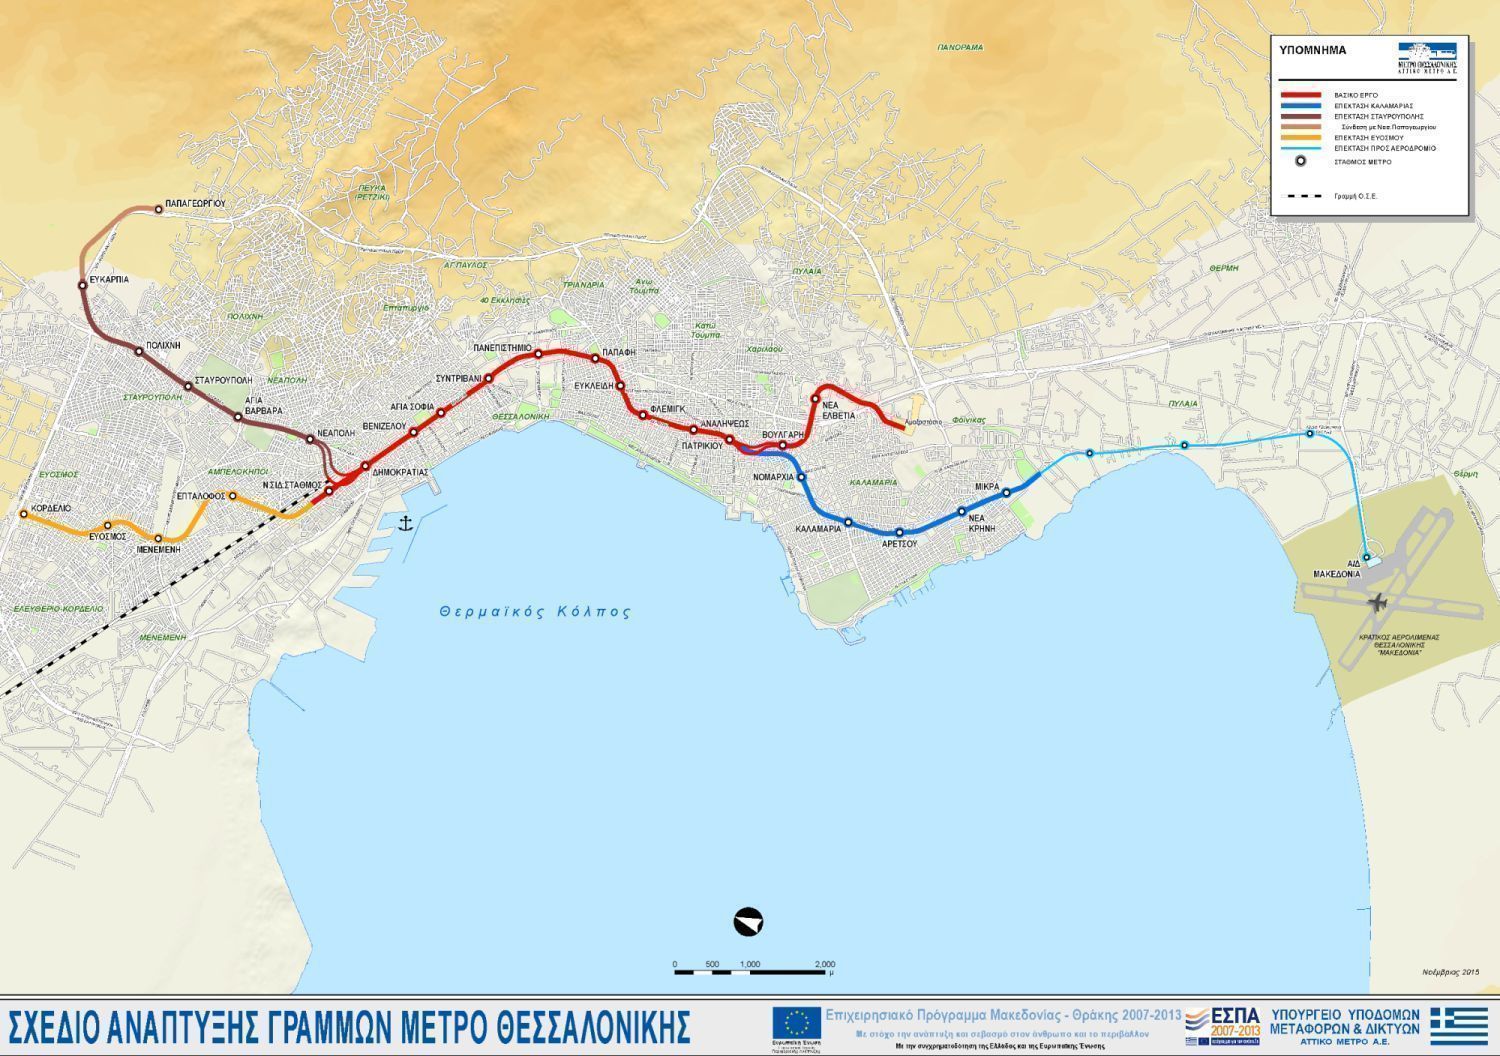 Route diagram of the 9.6km Thessaloniki metro system (in red), with future extensions (other colors).